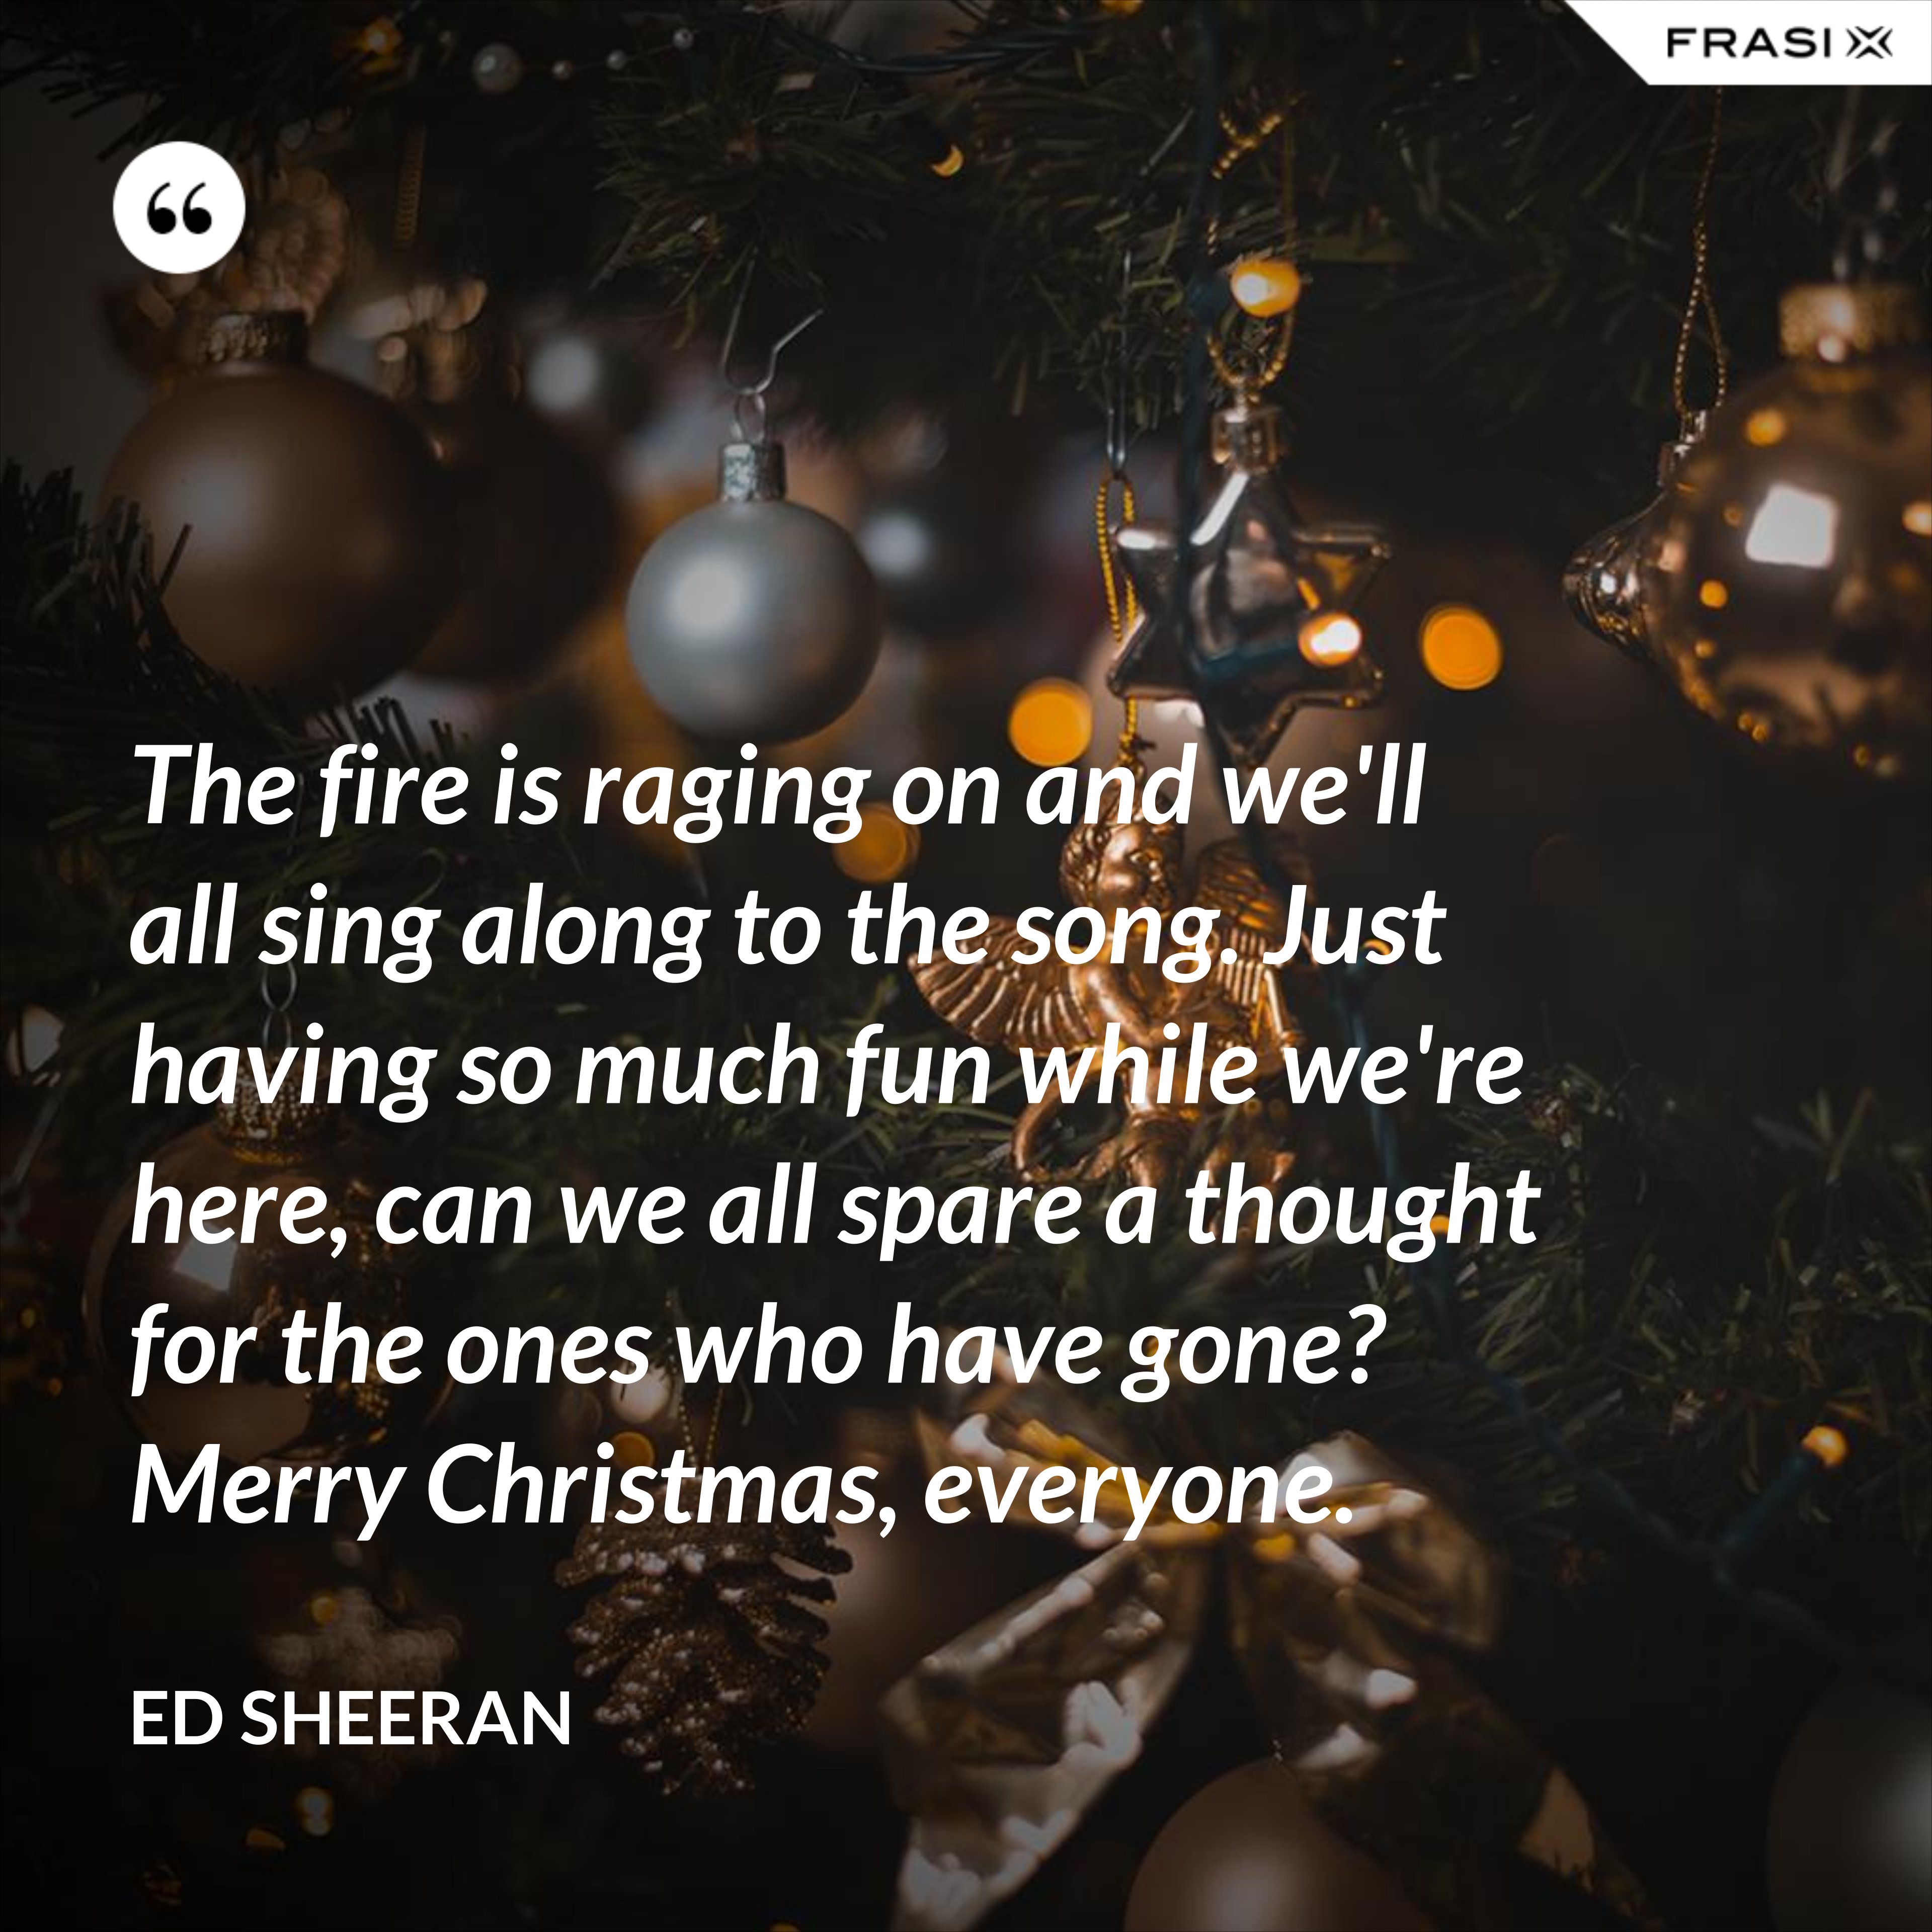 The fire is raging on and we'll all sing along to the song. Just having so much fun while we're here, can we all spare a thought for the ones who have gone? Merry Christmas, everyone. - Ed Sheeran